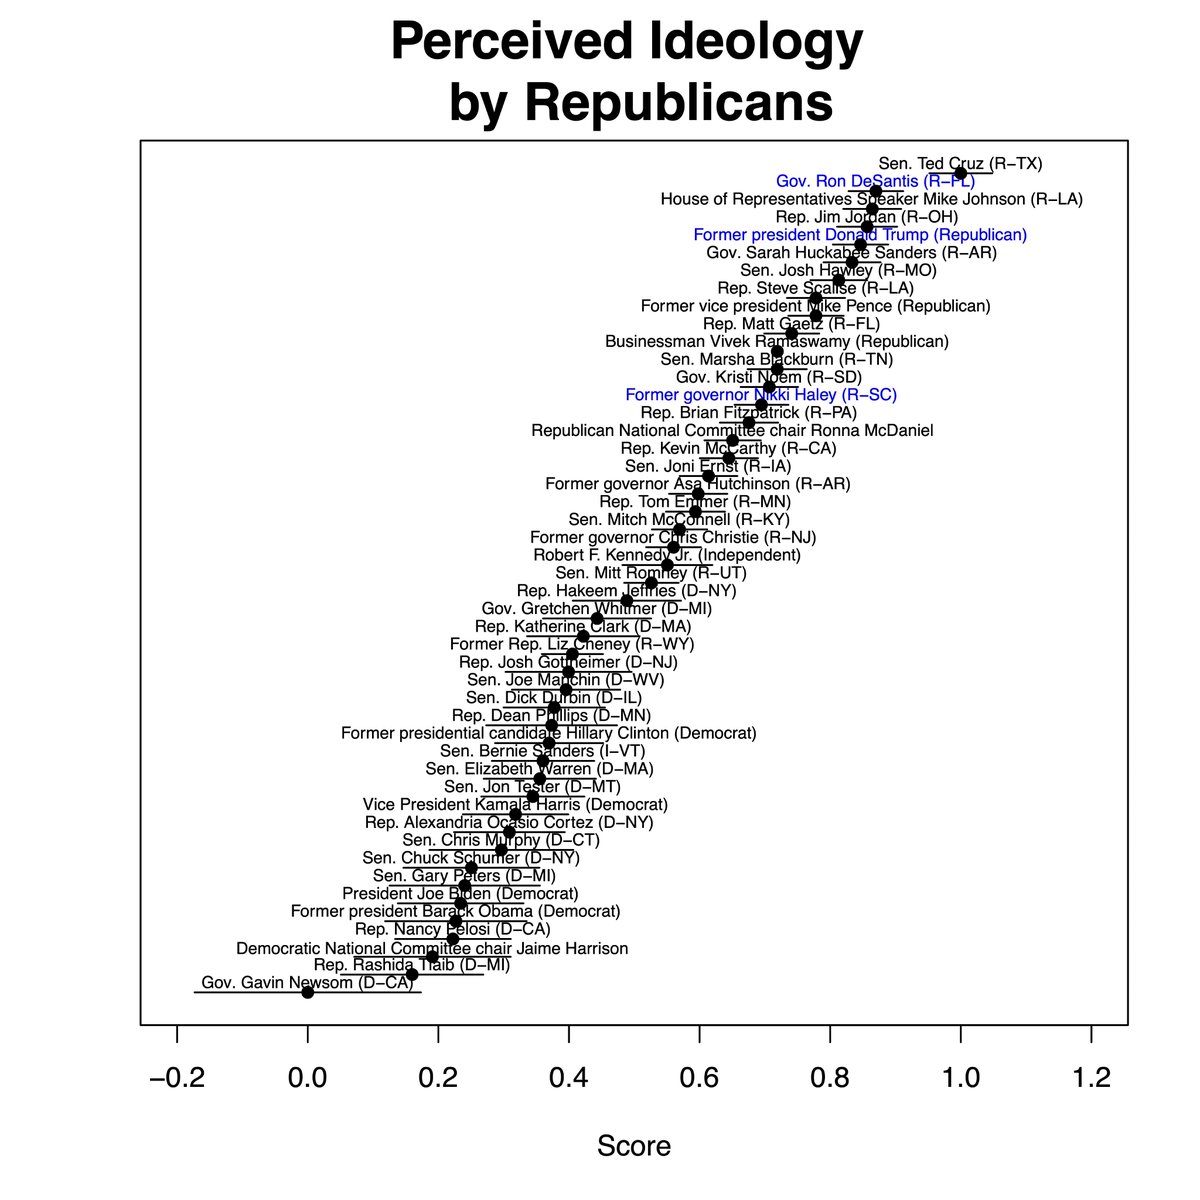 If you are curious about perceptions of where prominent Democrats fall on the left-right spectrum, check out these estimates from @ProfHansNoel & me, written up on my Substack: danhopkins.substack.com/p/which-of-the… tl;dr Biden is perceived as more centrist than Harris, Newsom.